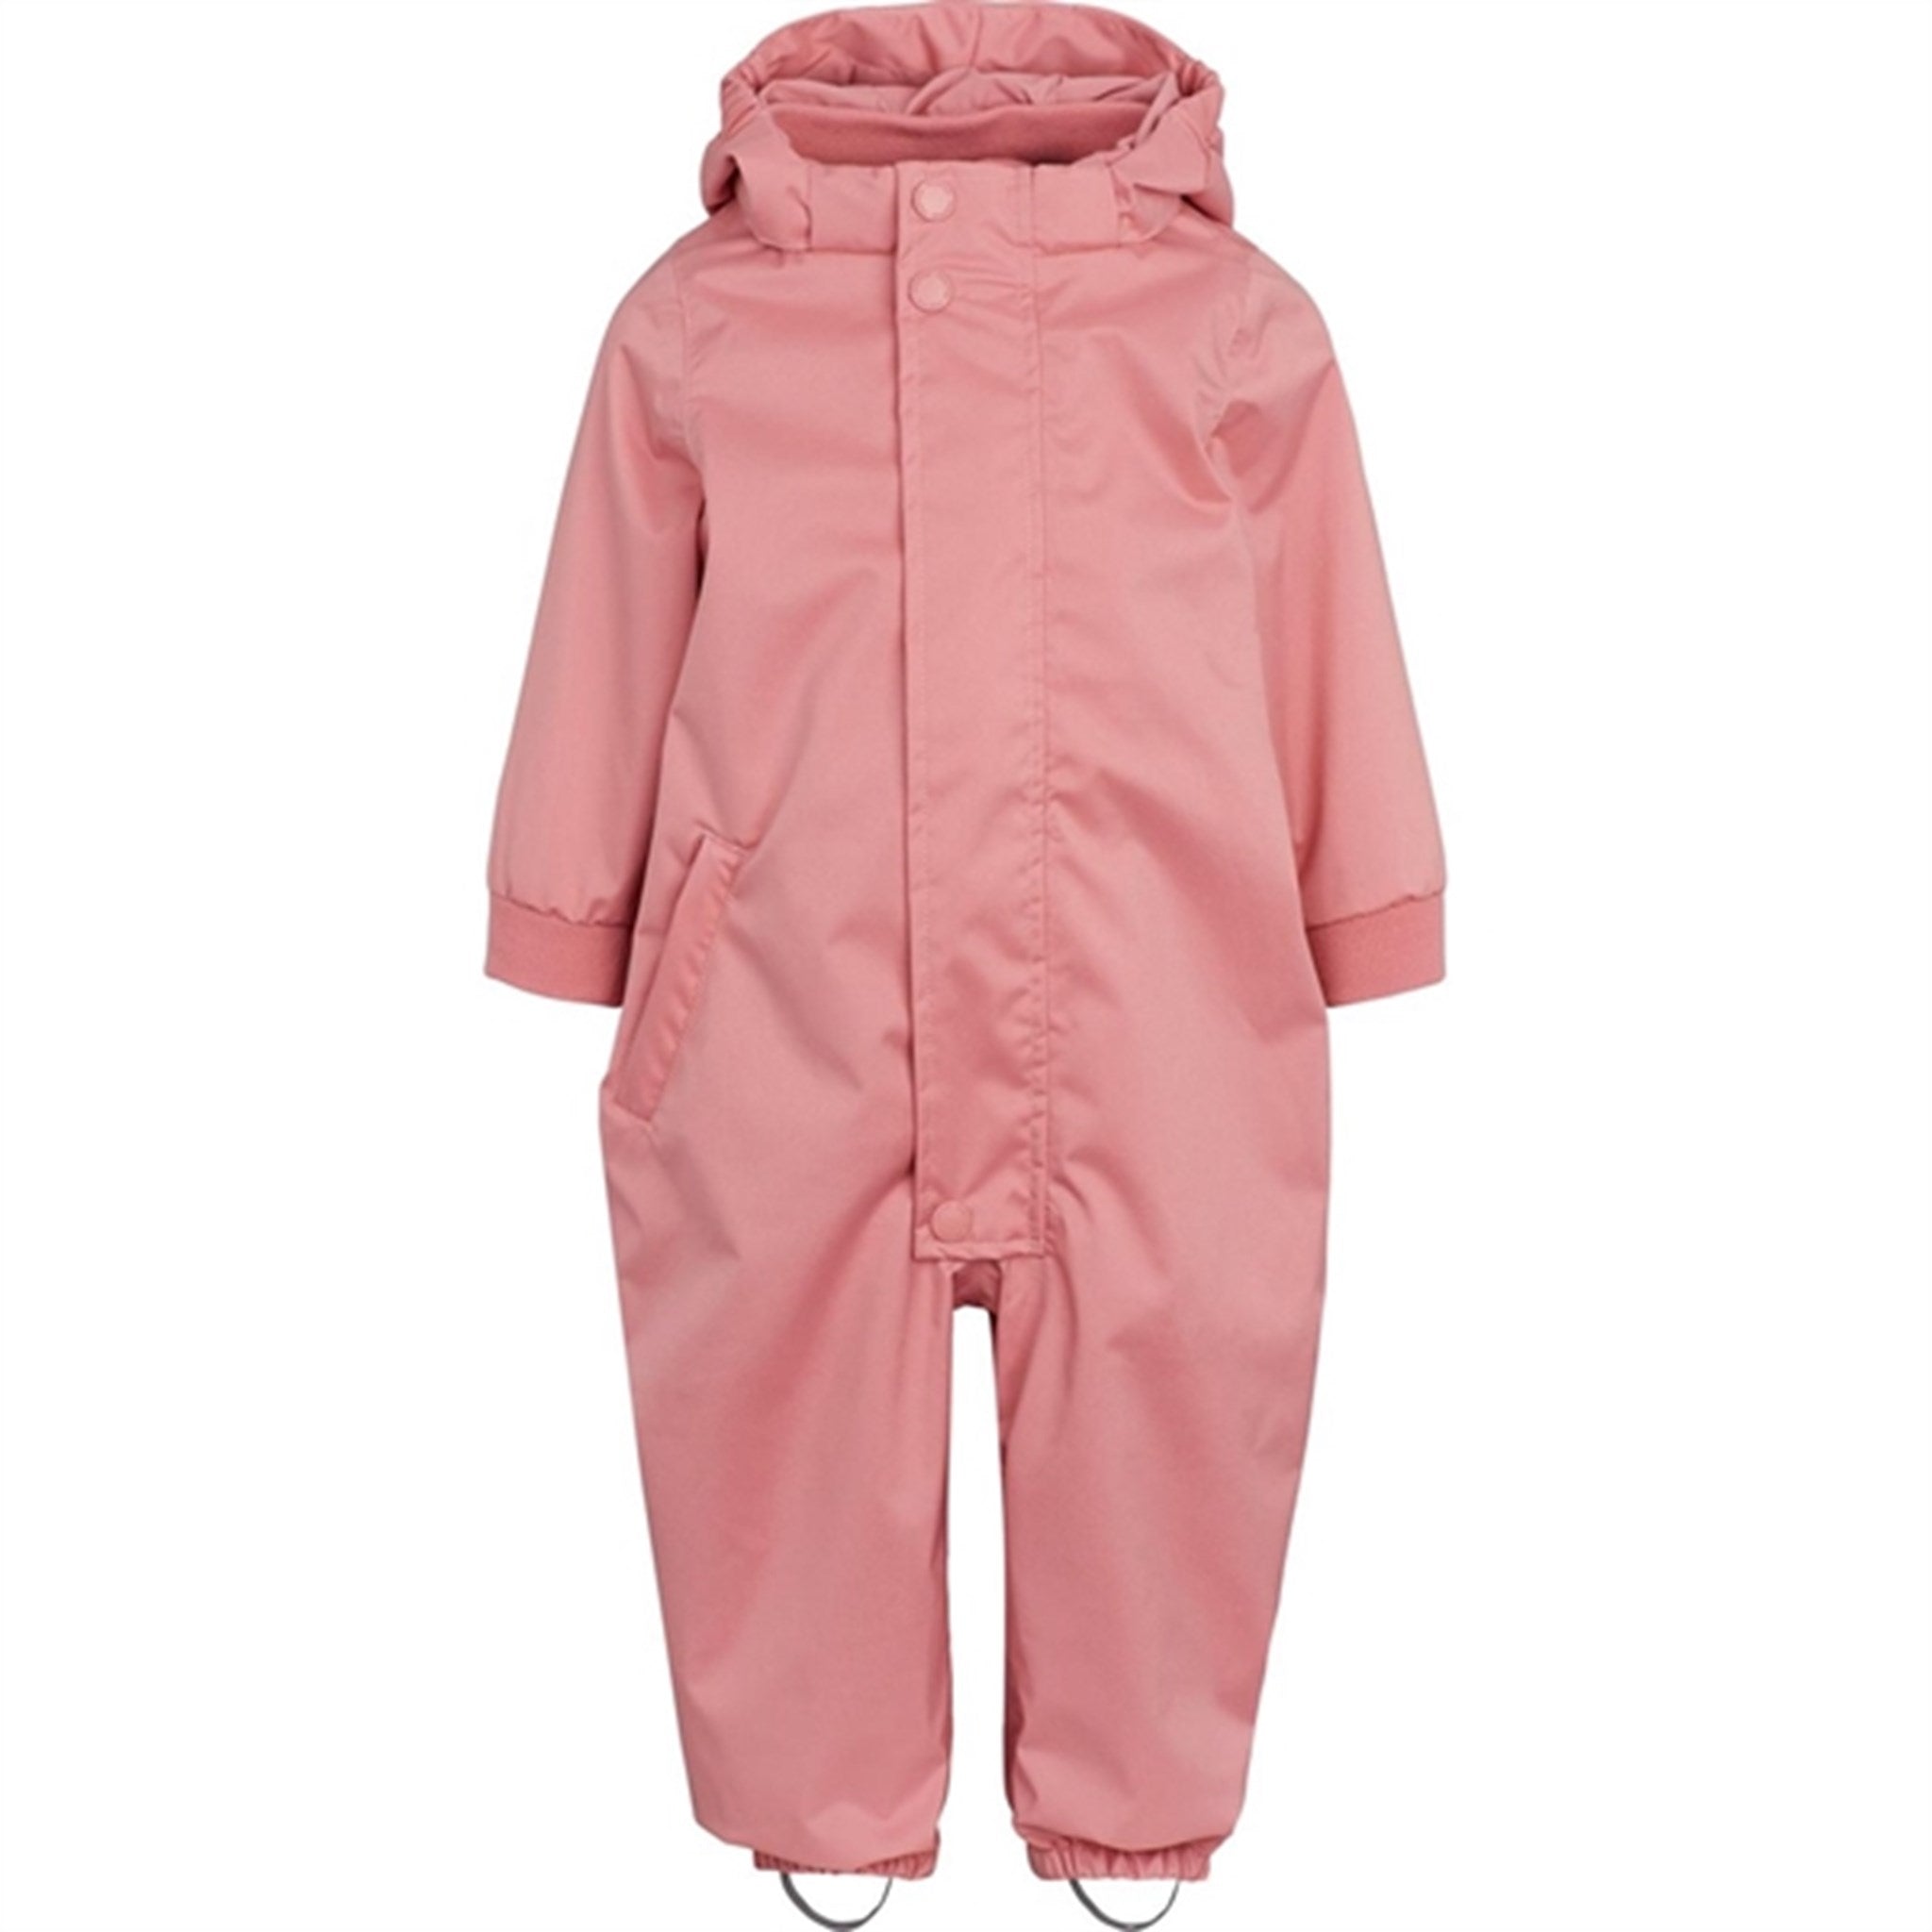 MarMar Spring Suit Orva Pink Delight Technical Summer Outerwear